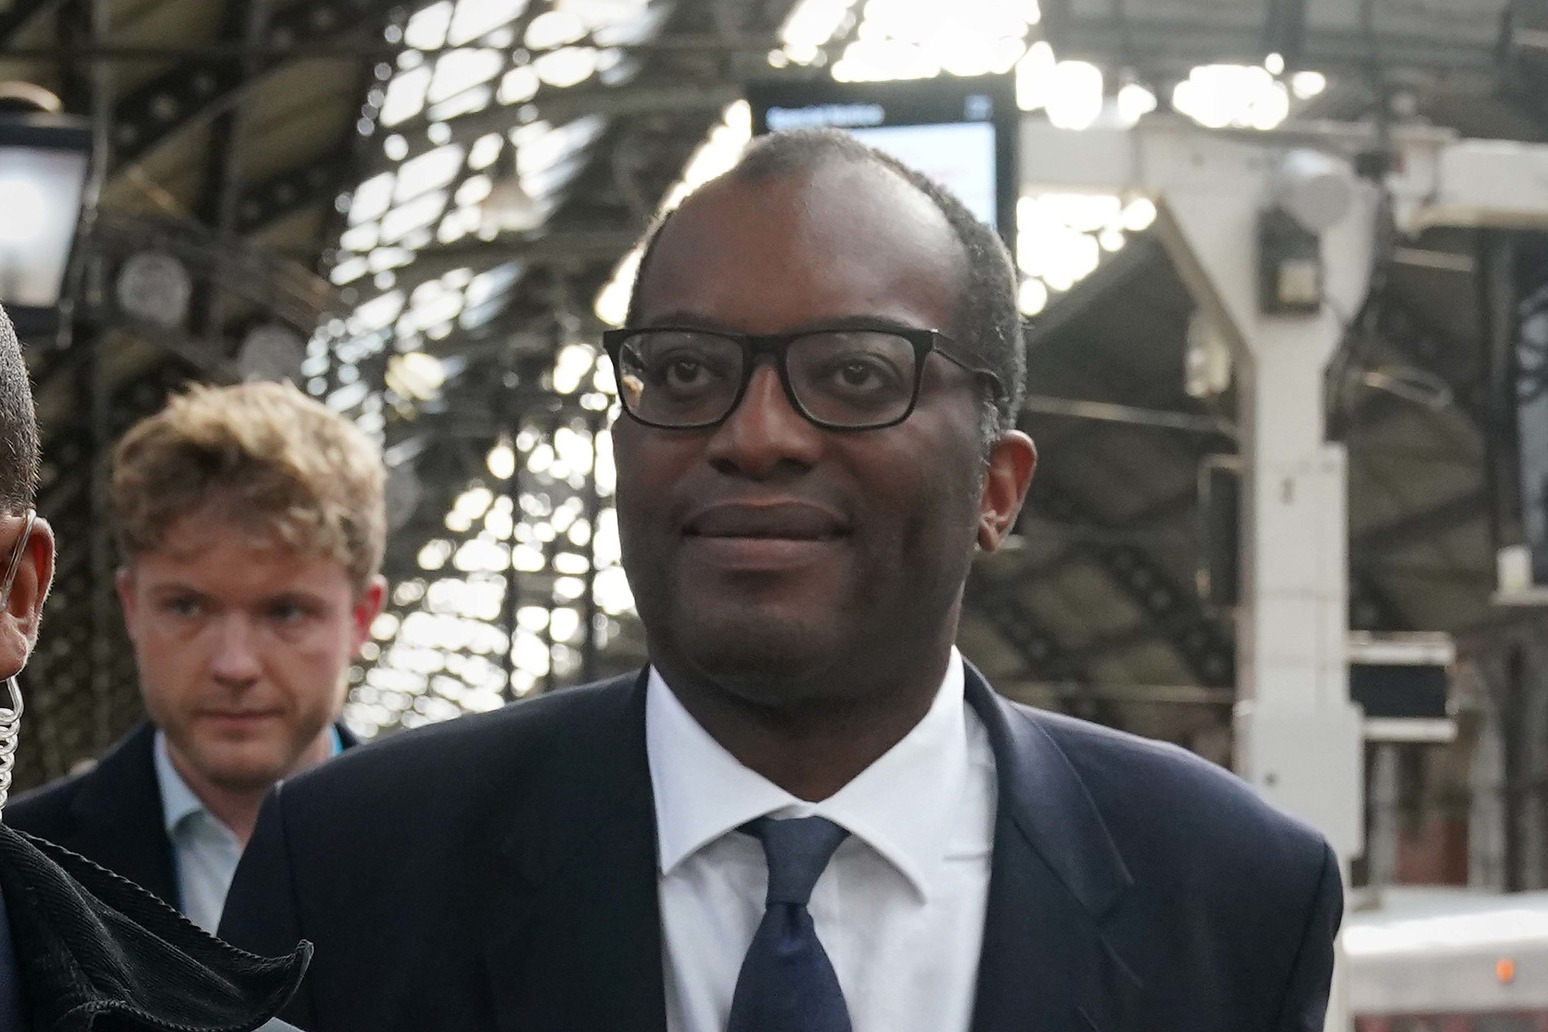 Truss and Kwarteng defend tax cuts as ‘right plan’ to get economy moving 